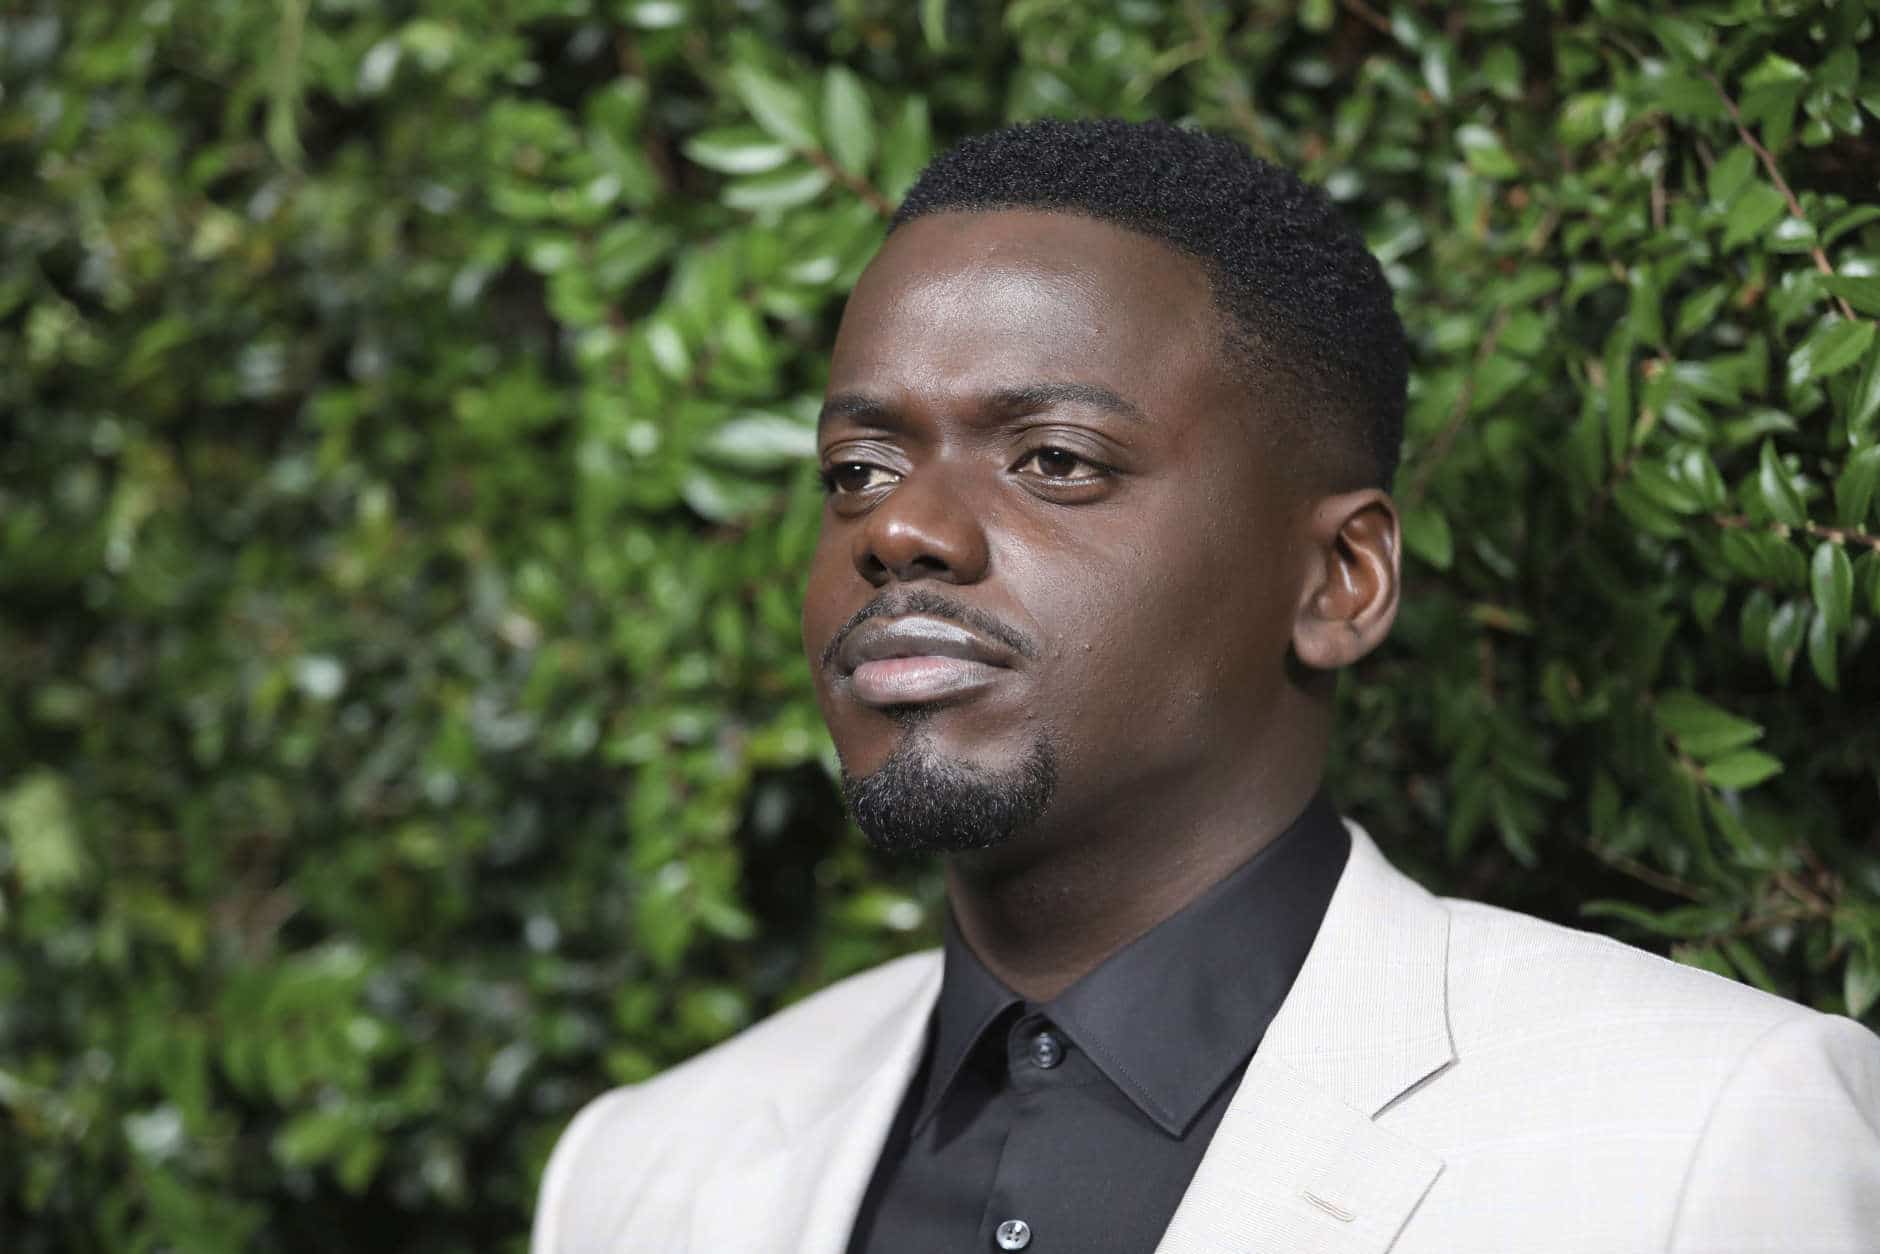 Daniel Kaluuya arrives at the CHANEL Pre-Oscar Dinner at Madeo Restaurant on Saturday, March 3, 2018, in Los Angeles. (Photo by Omar Vega/Invision/AP)